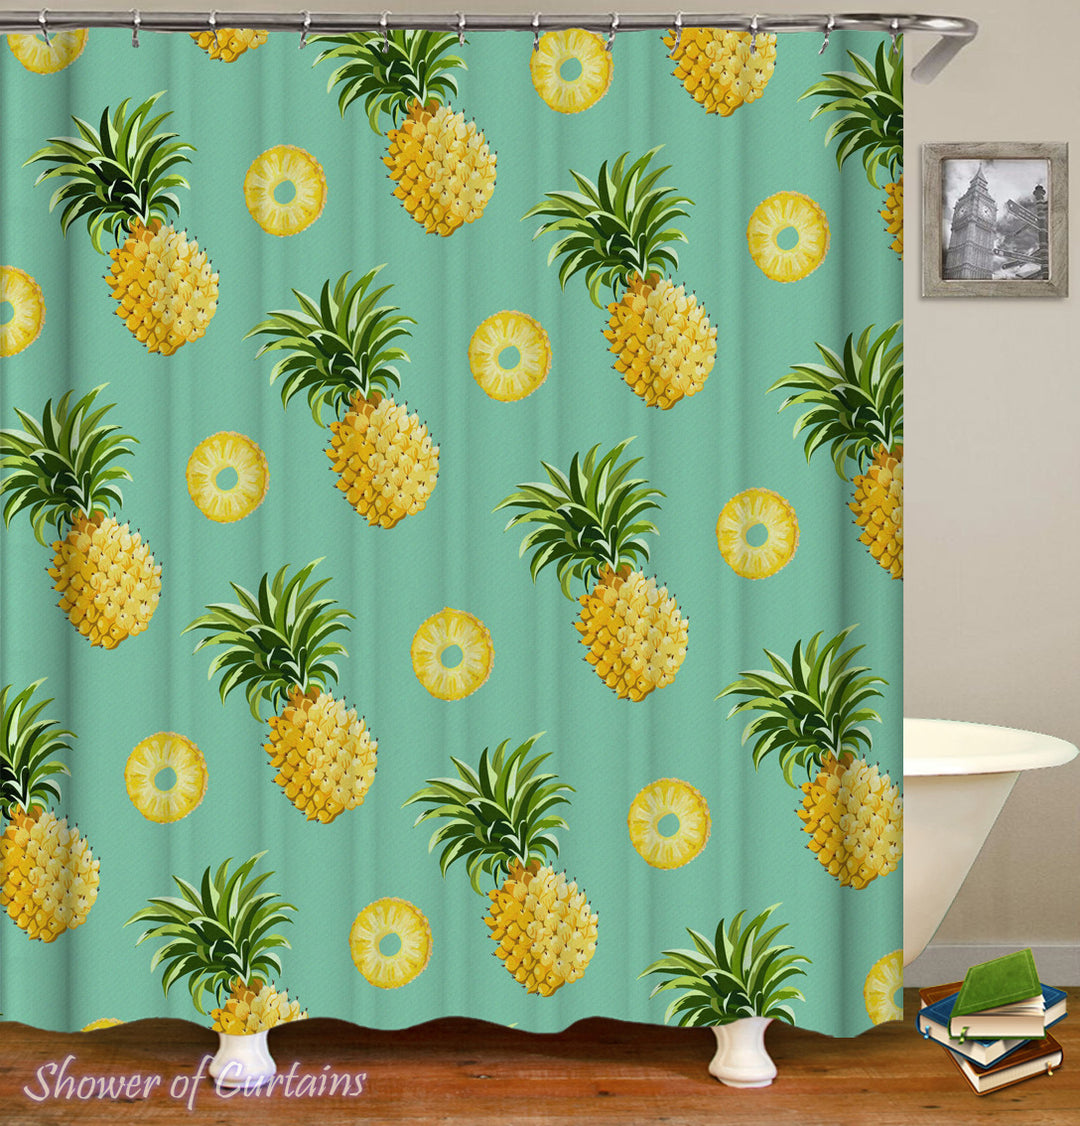 Pineapple Shower Curtain - Pineapples And Pineapples Cuts